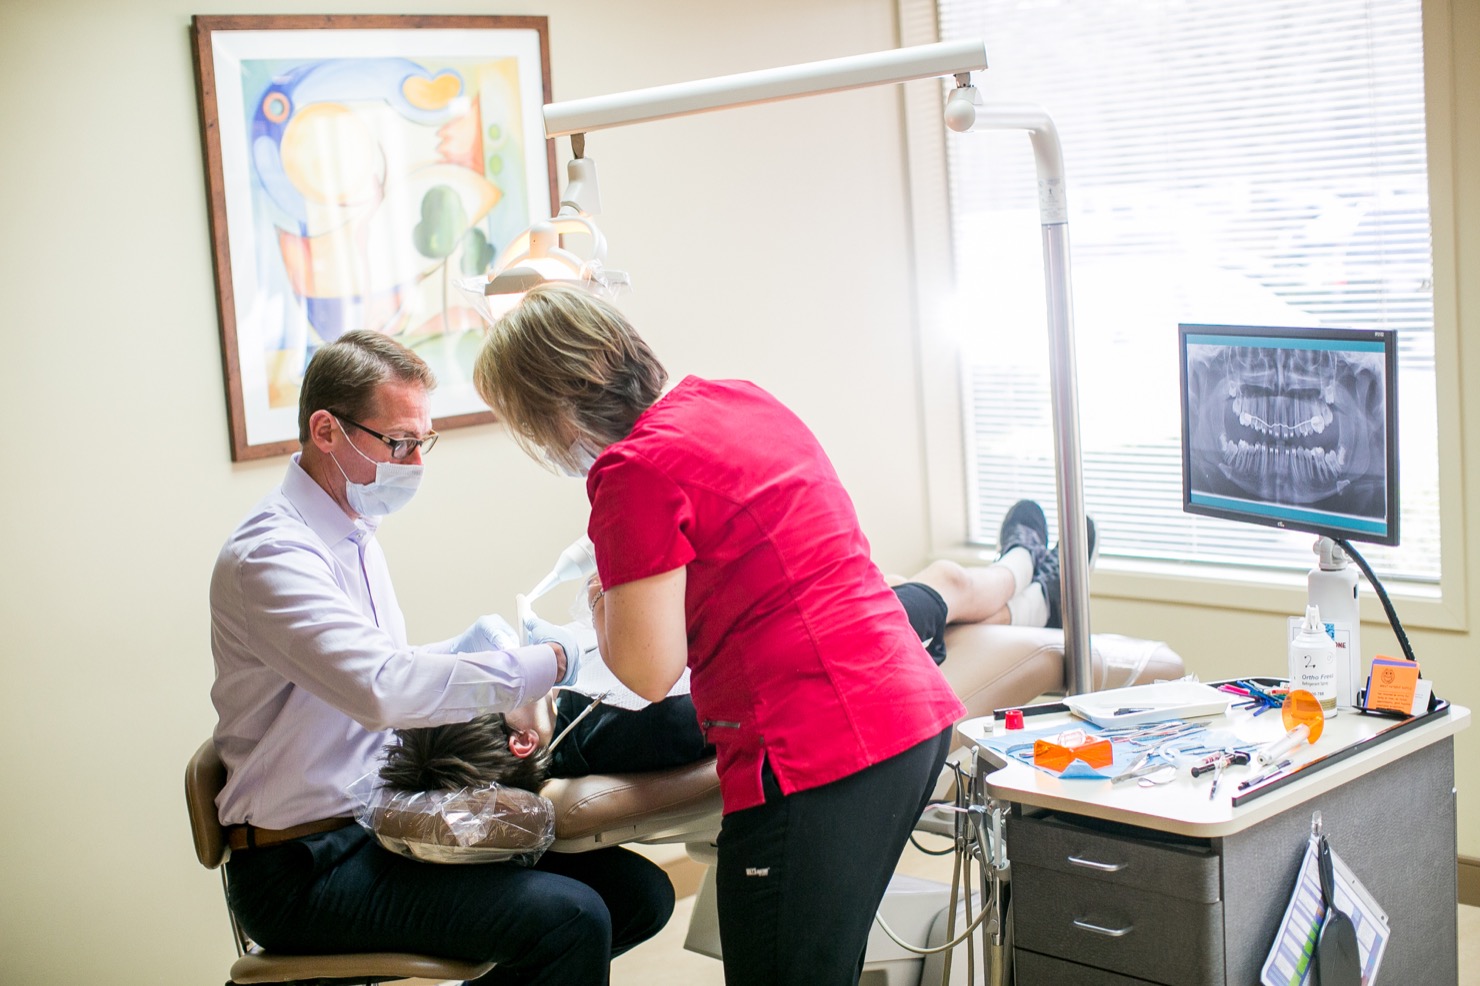 Dr. Roos treating a patient based on technology